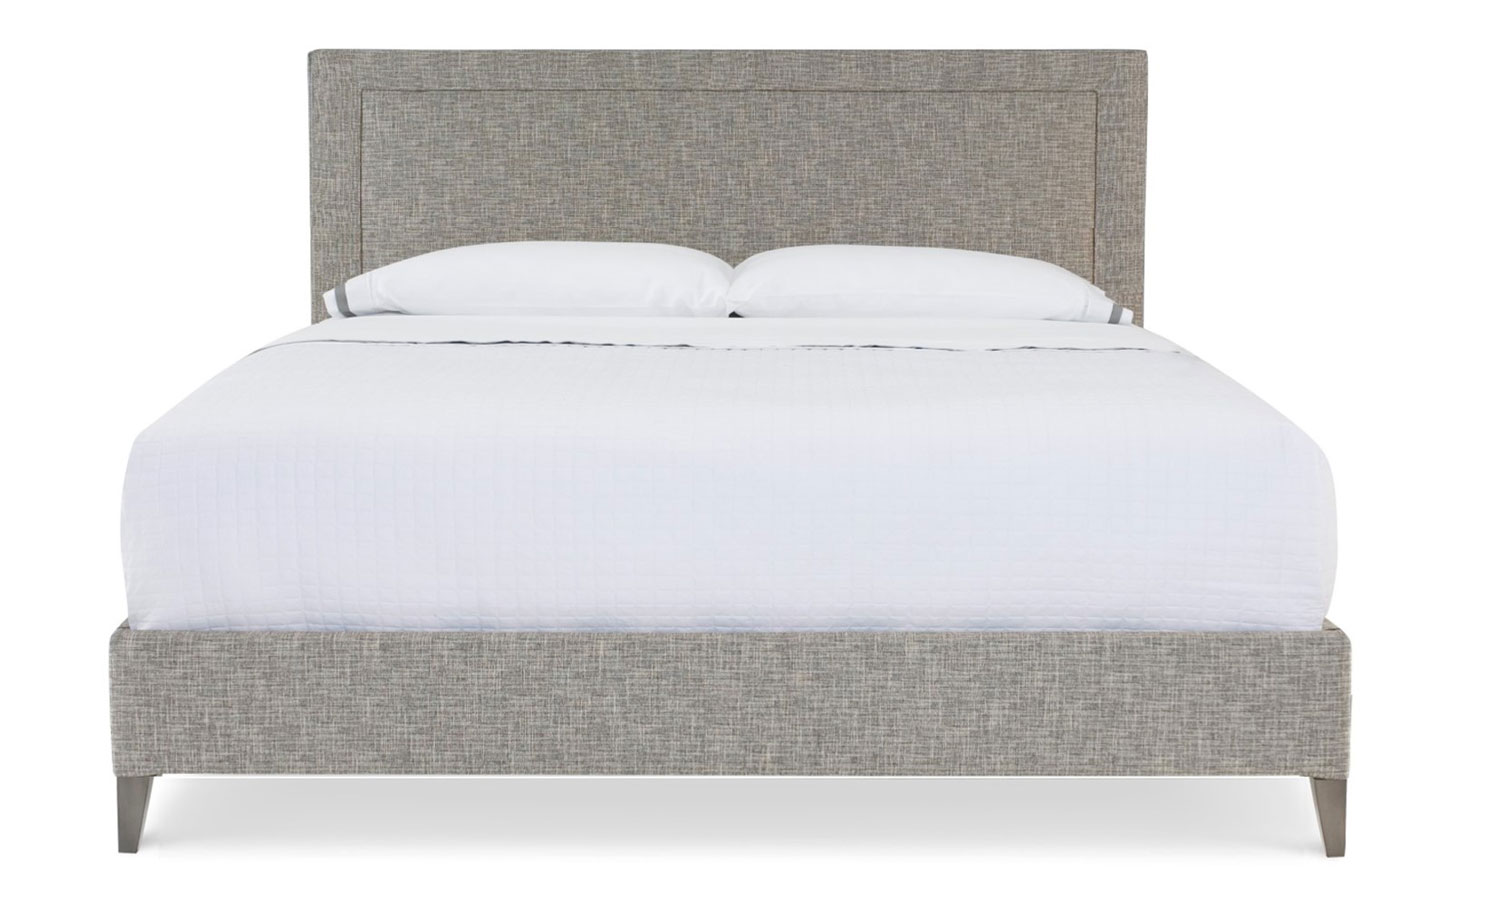 Wesley Hall 196 Phanes Bed with 56 inch headboard